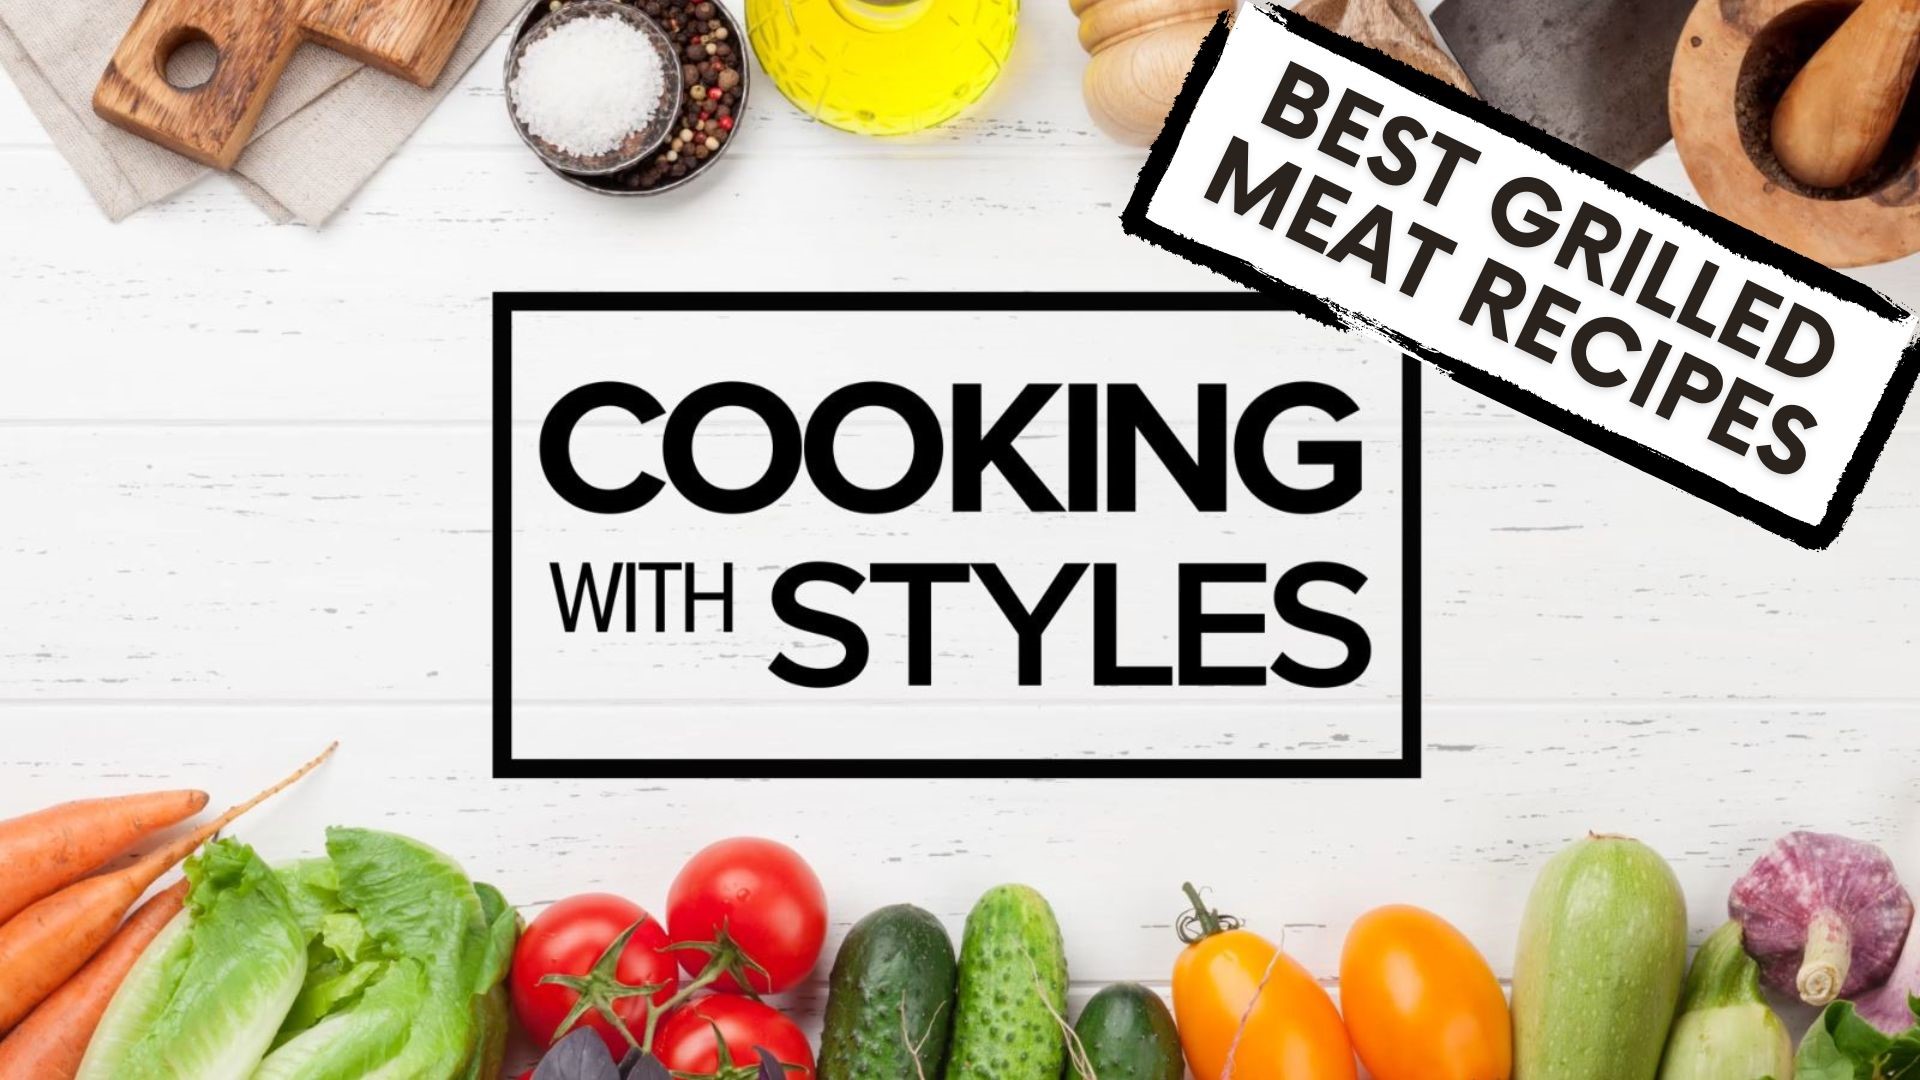 Shawn Styles shares some of his best recipes for grilled meat. This includes steak, Huli Huli chicken, Hawaiian sliders, cheesesteak and more.